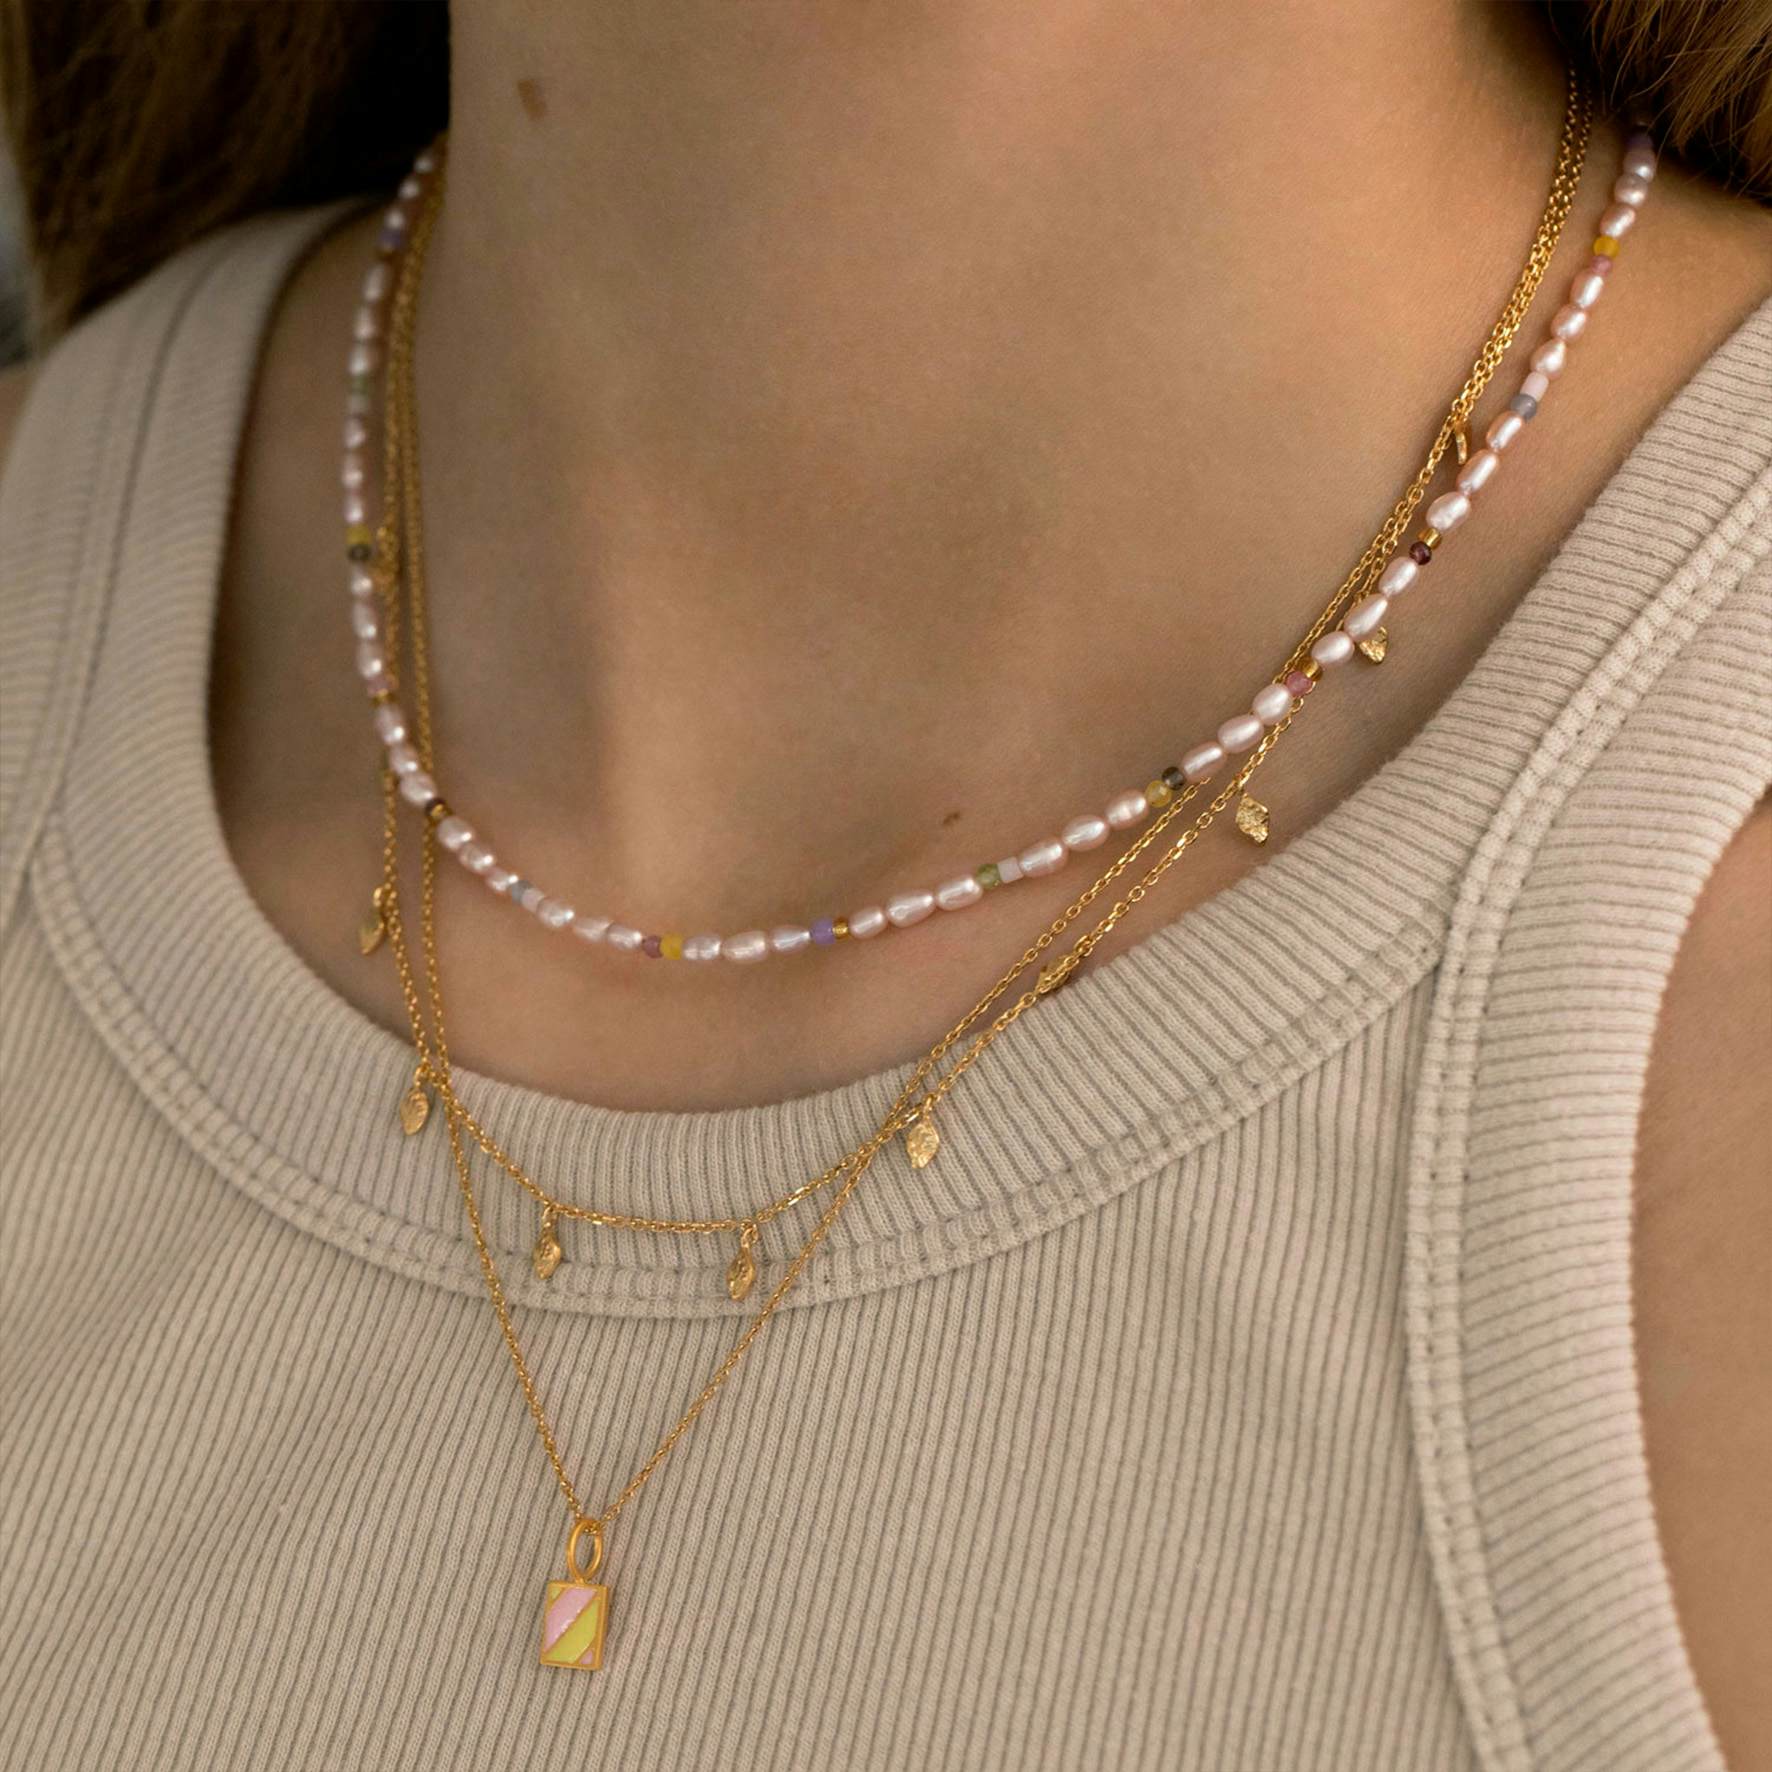 Confetti Pearl Necklace With Beige and Pastel Mix from STINE A Jewelry in Goldplated-Silver Sterling 925